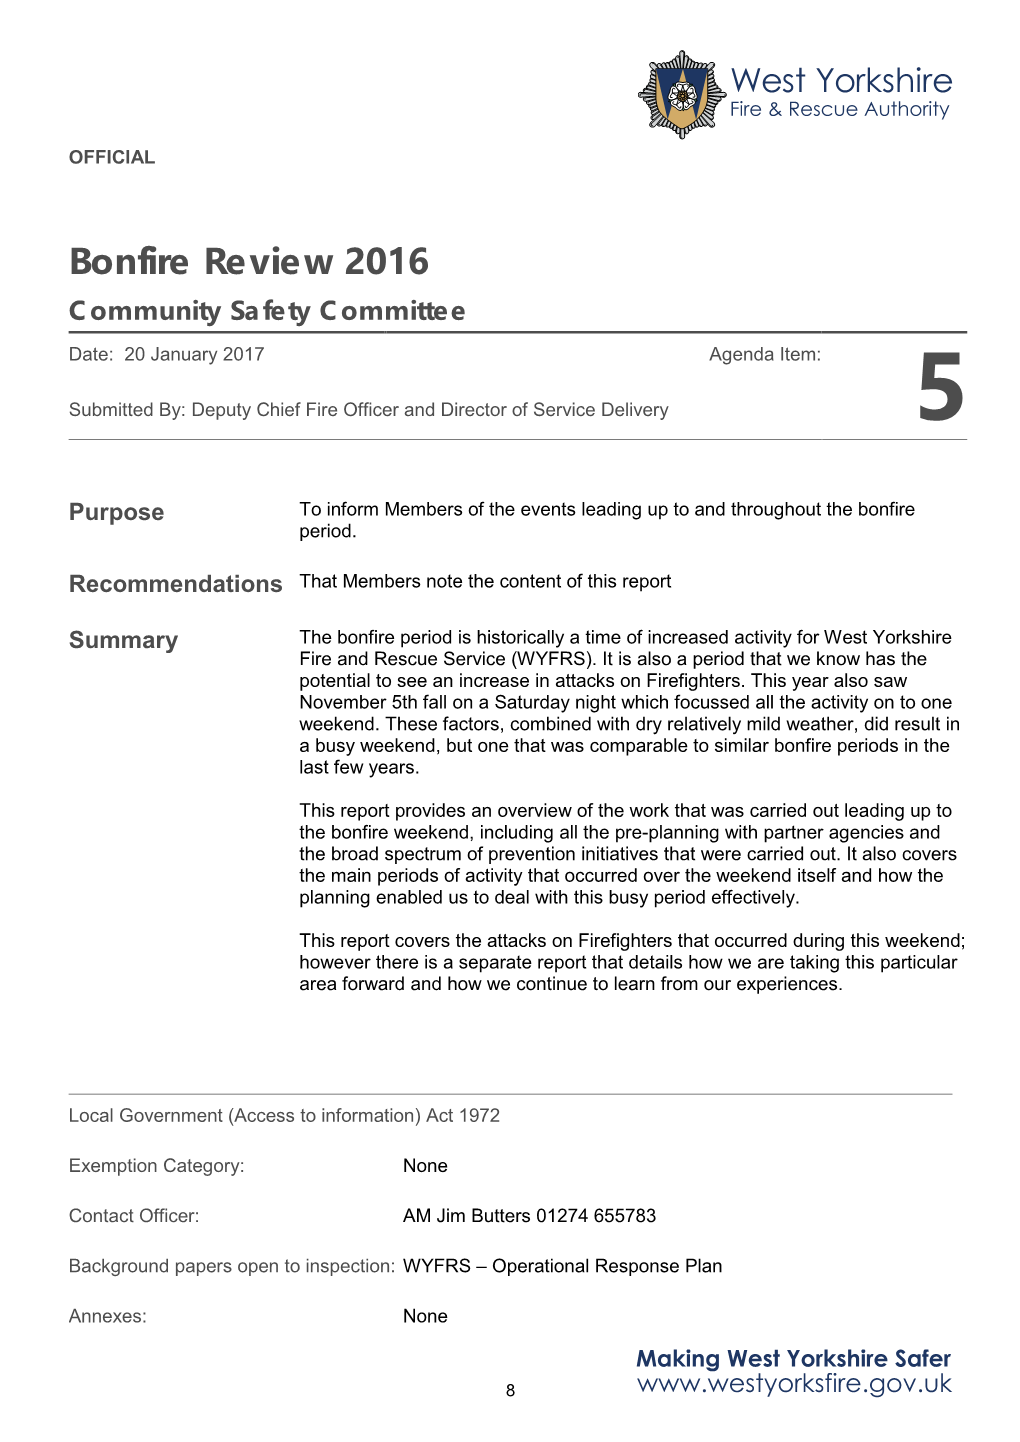 Bonfire Review 2016 Community Safety Committee